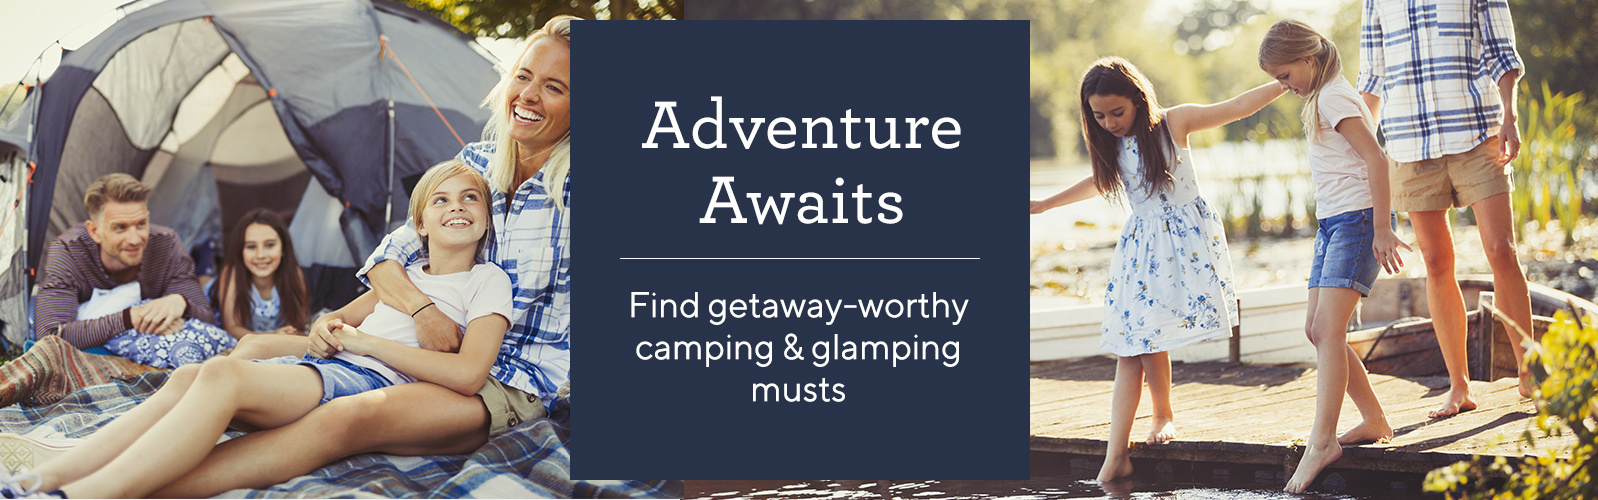 Adventure Awaits.  Find getaway-worthy camping & glamping musts